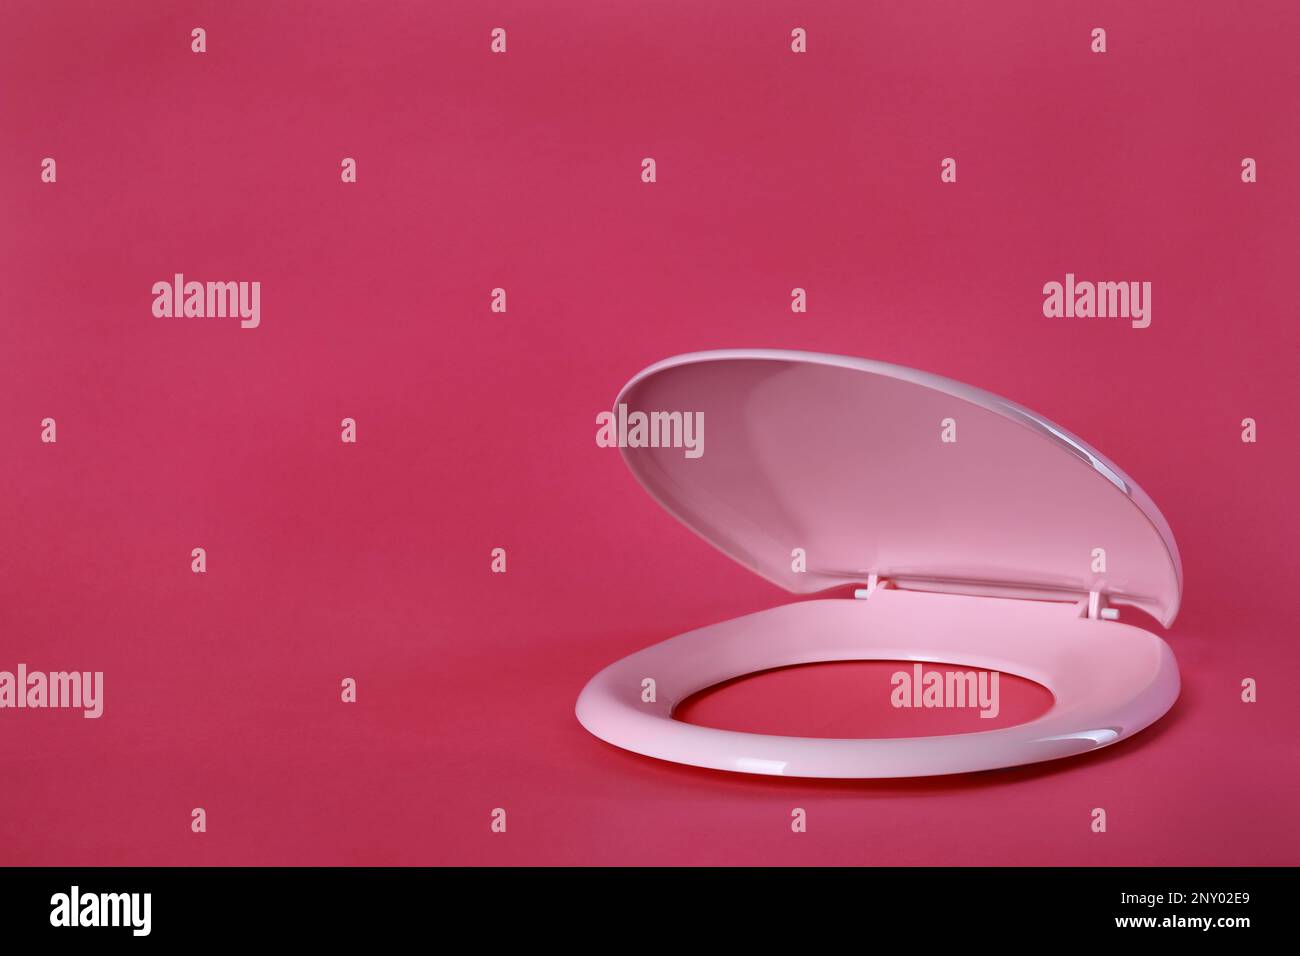 New plastic toilet seat on pink background, space for text Stock Photo